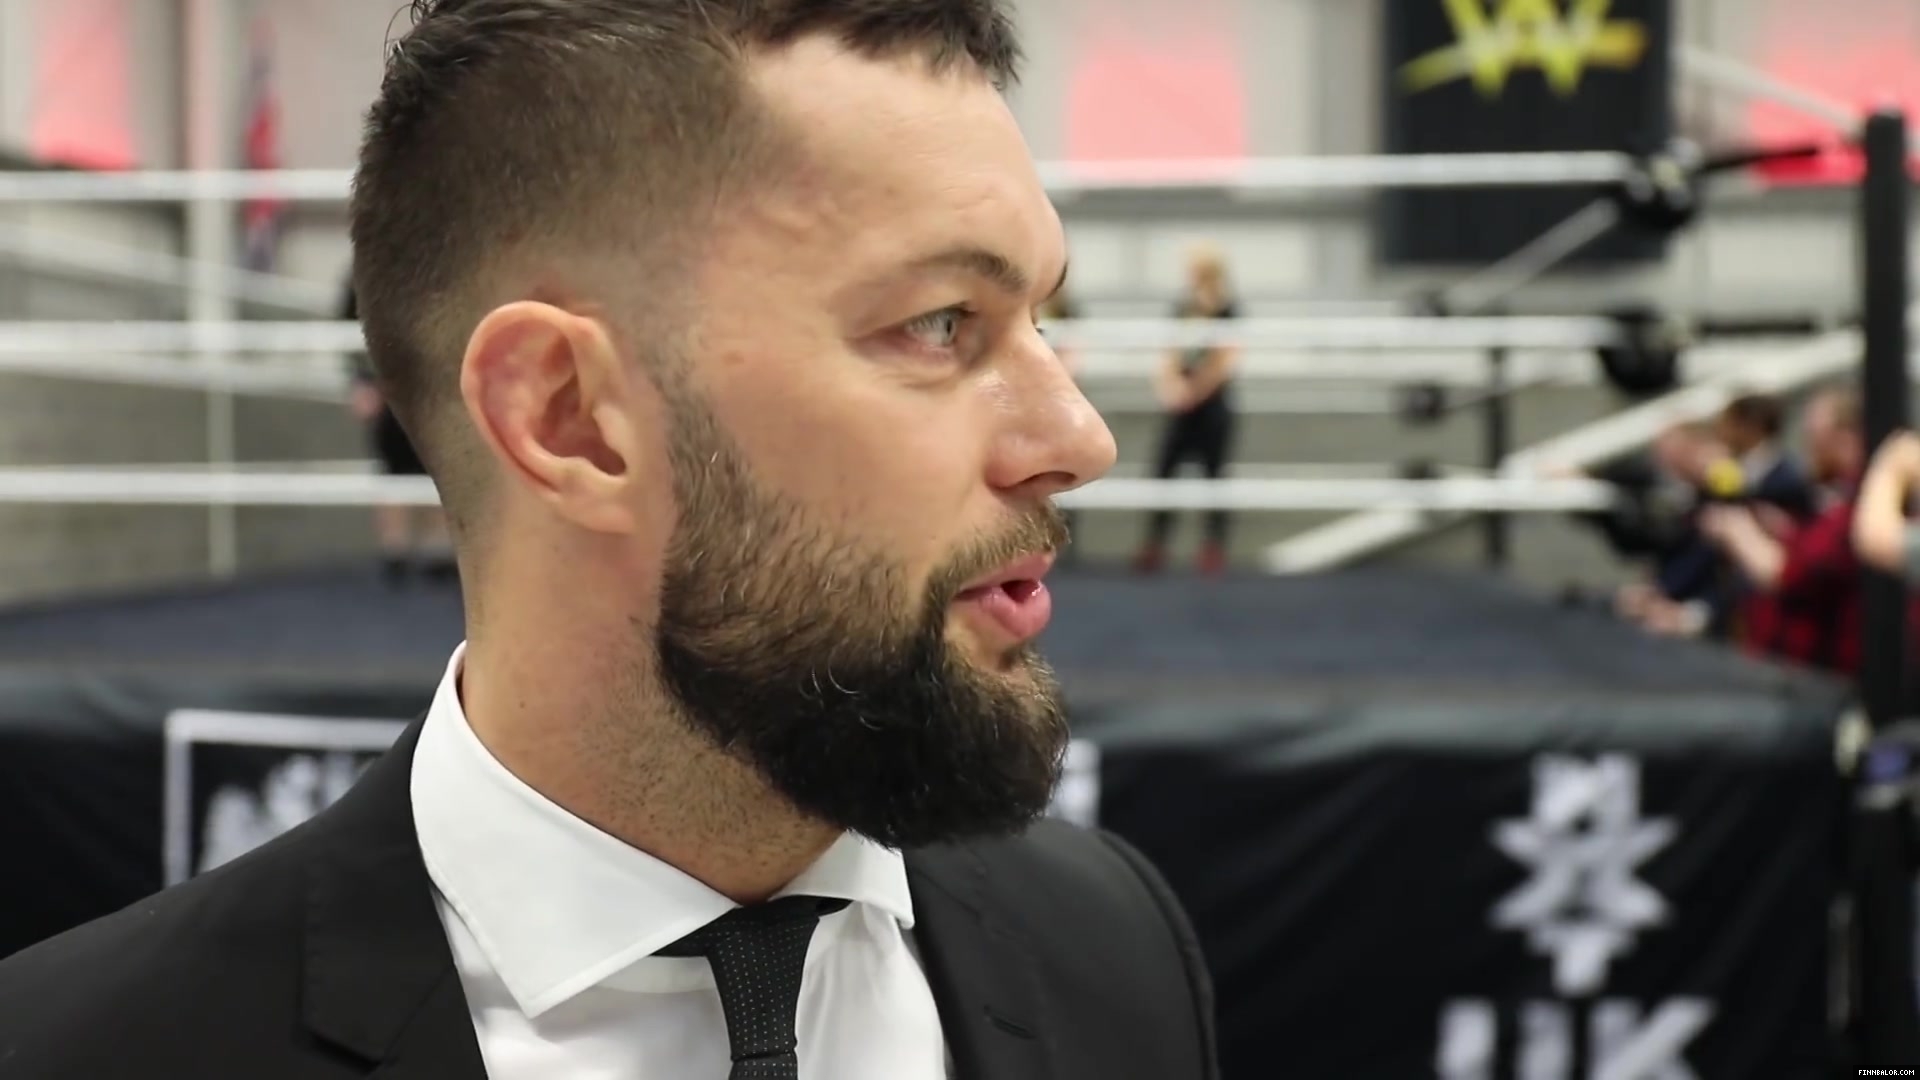 WWE_Superstar_FINN_BALOR_joins_MOUSTACHE_MOUNTAIN_at_the_opening_of_the_NXT_UK_PC_080.jpg